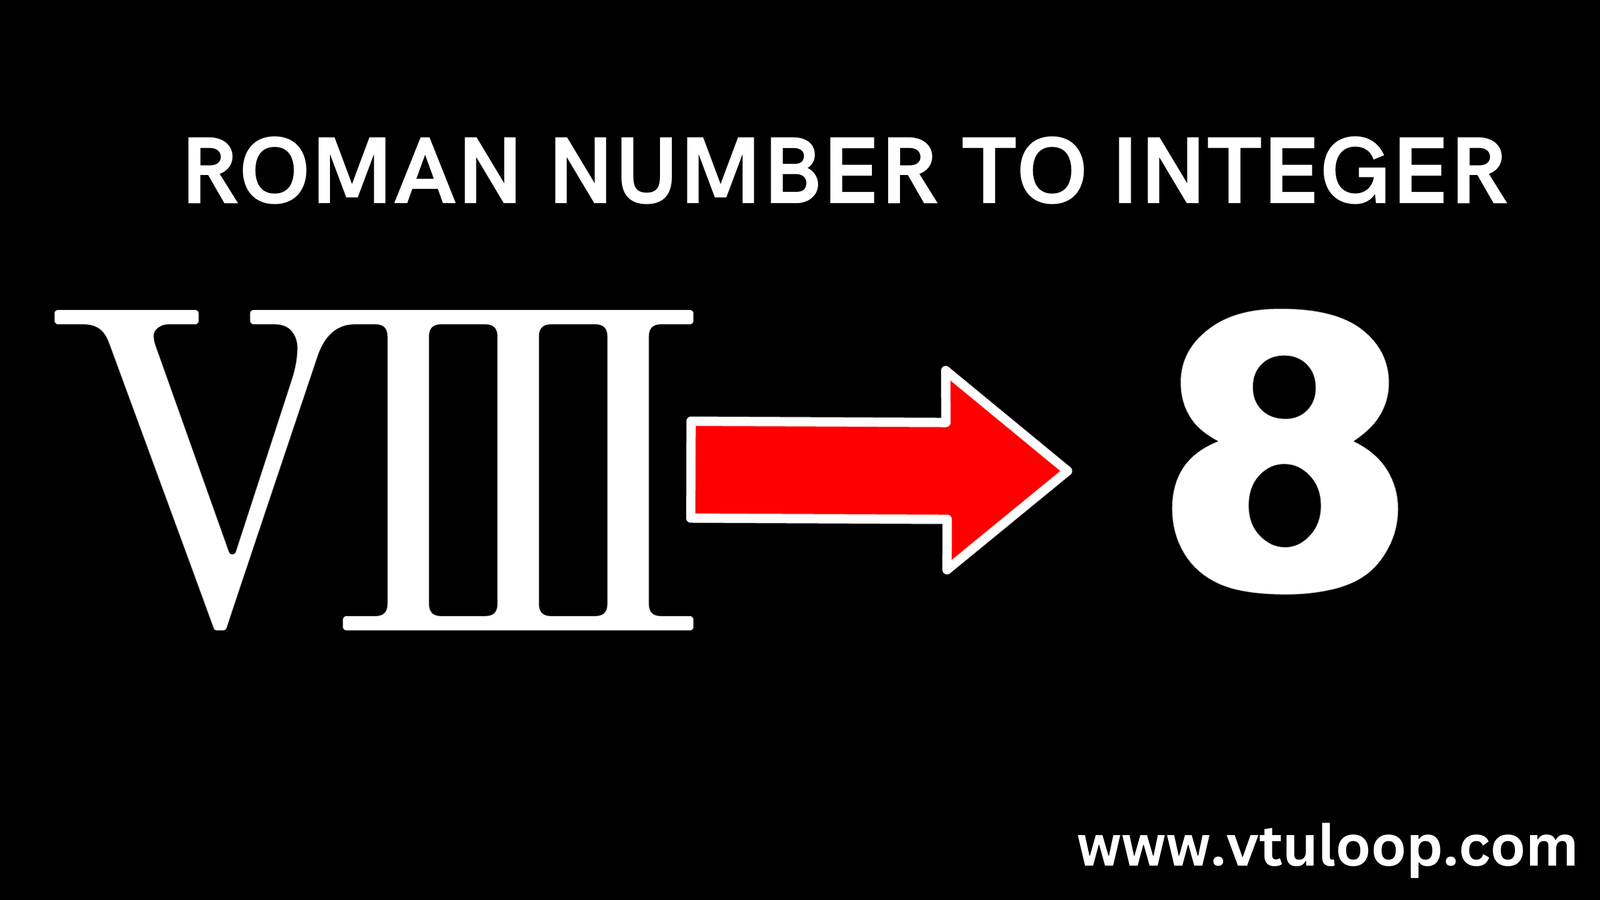 Roman number to integer